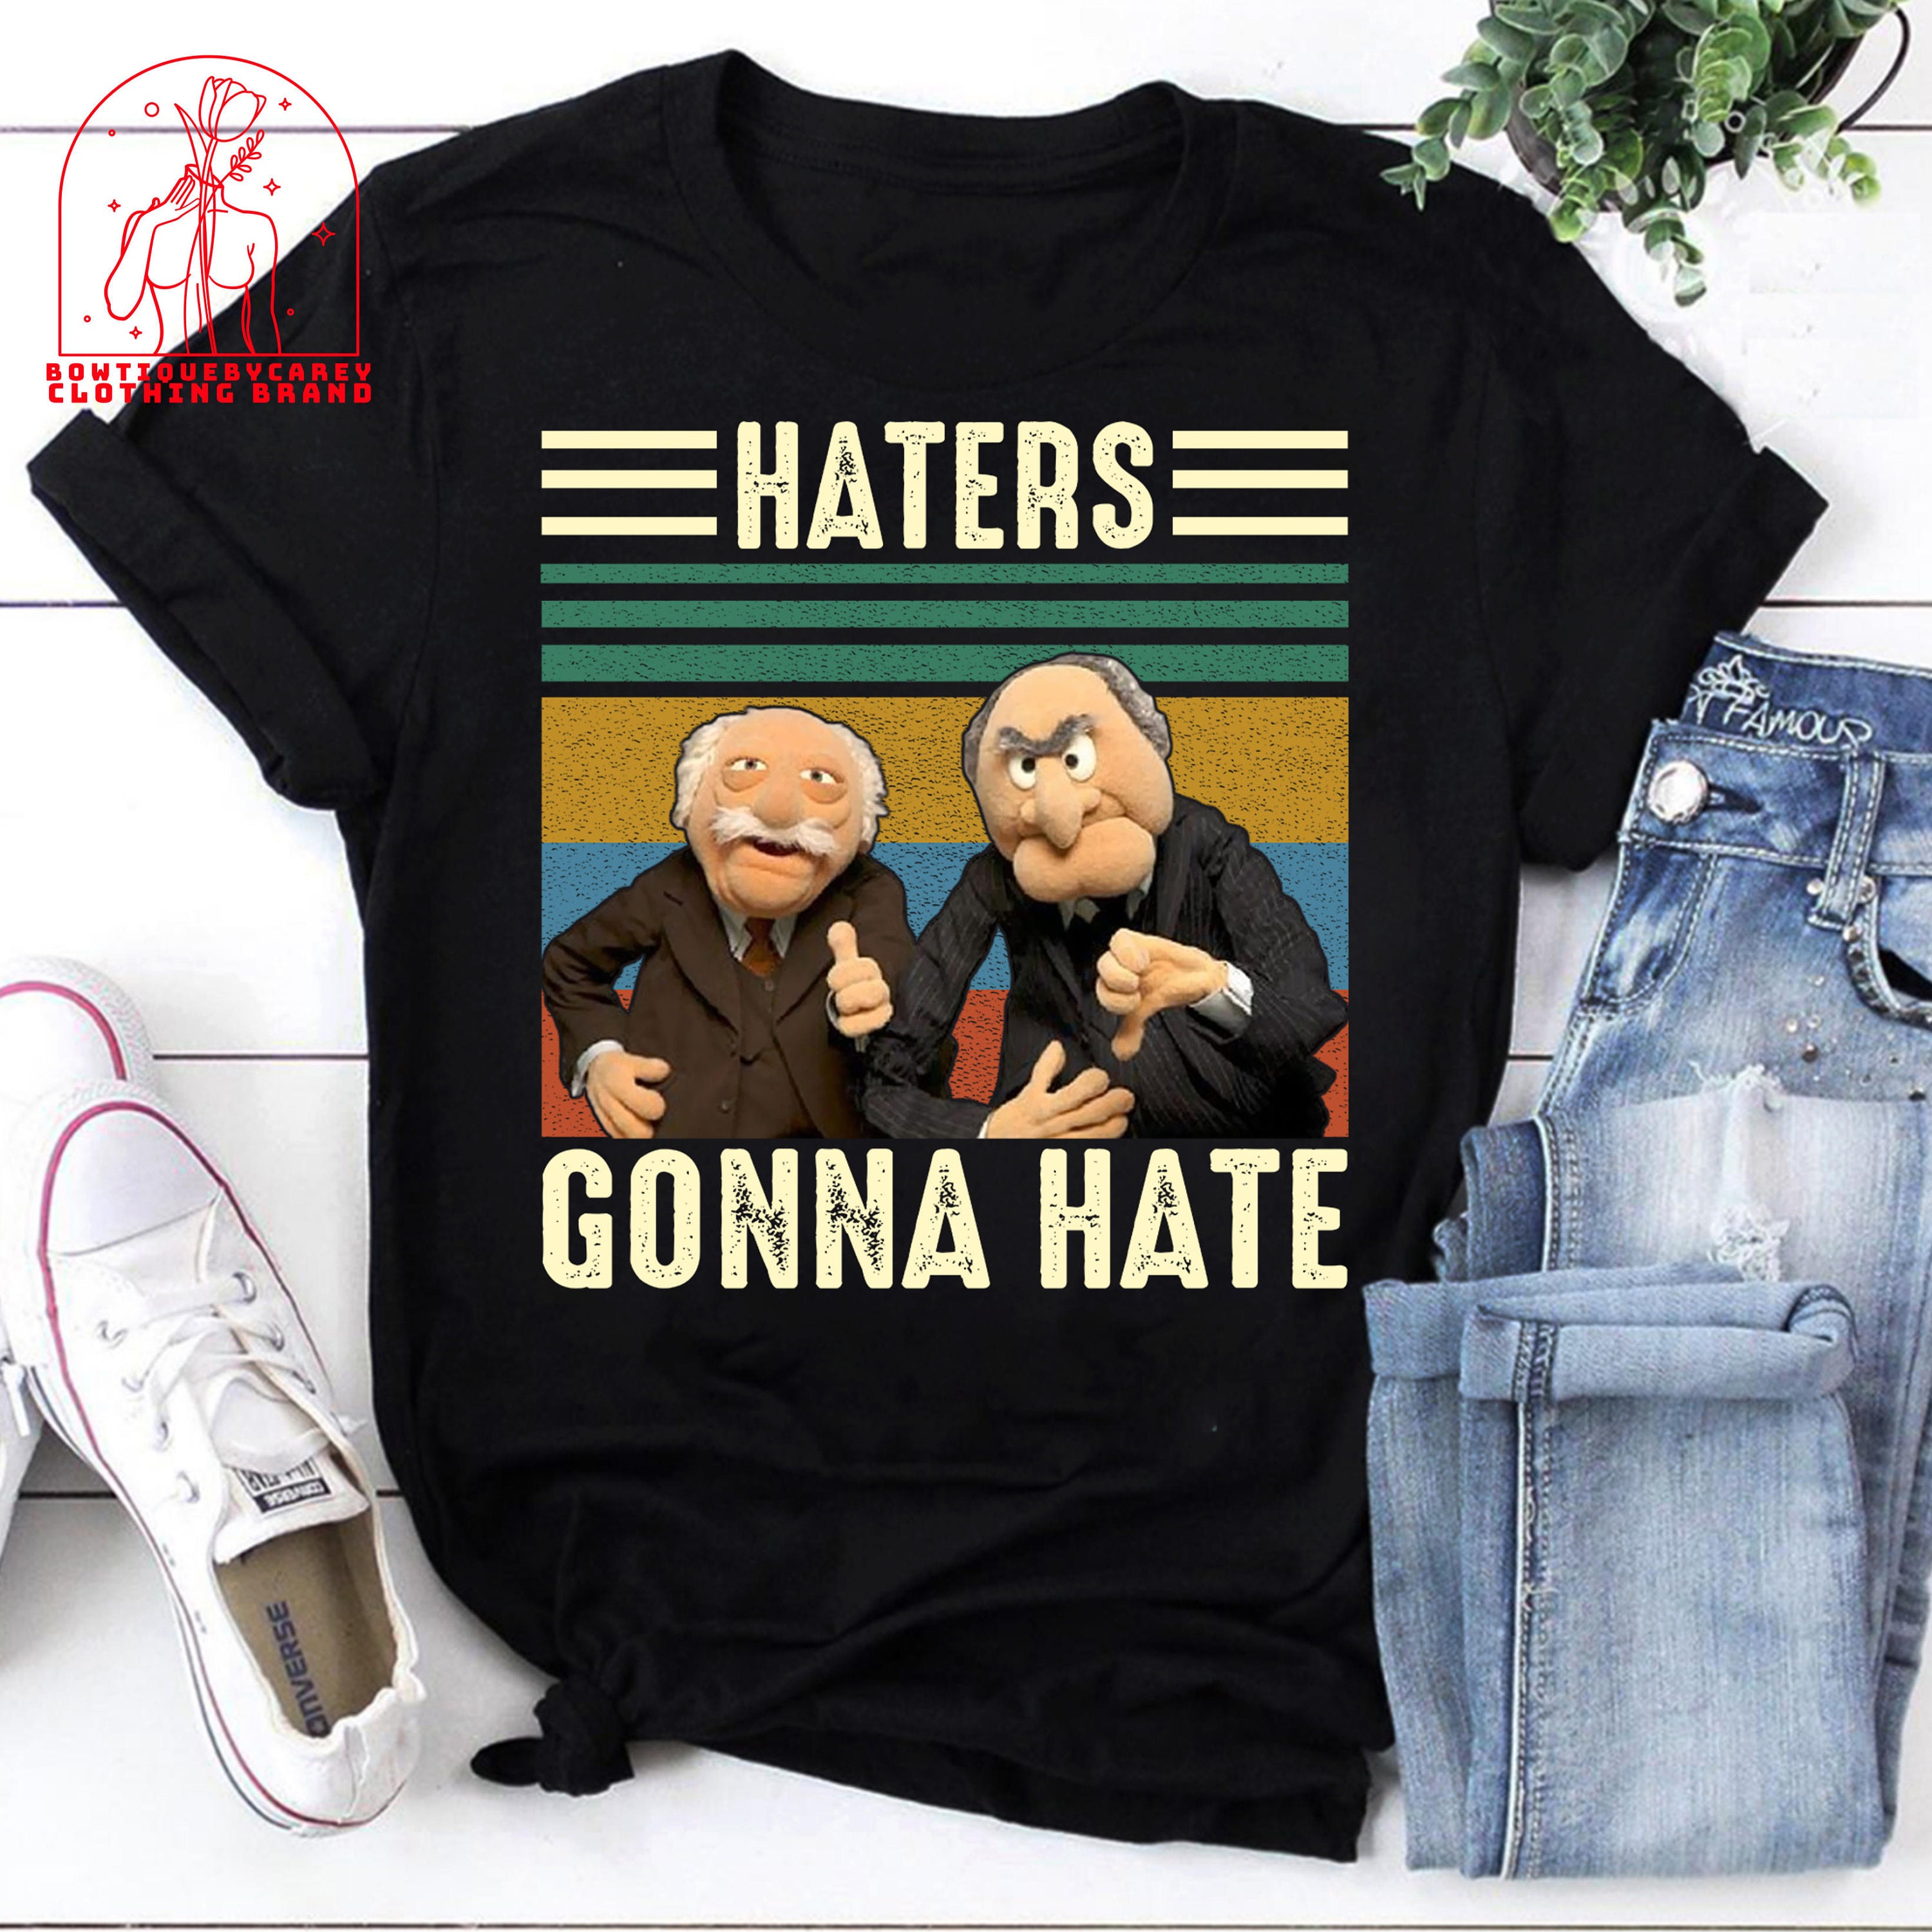 Haters Gonna Hate The Muppet Show Puppet Statler Waldorf Unisex T-Shirt